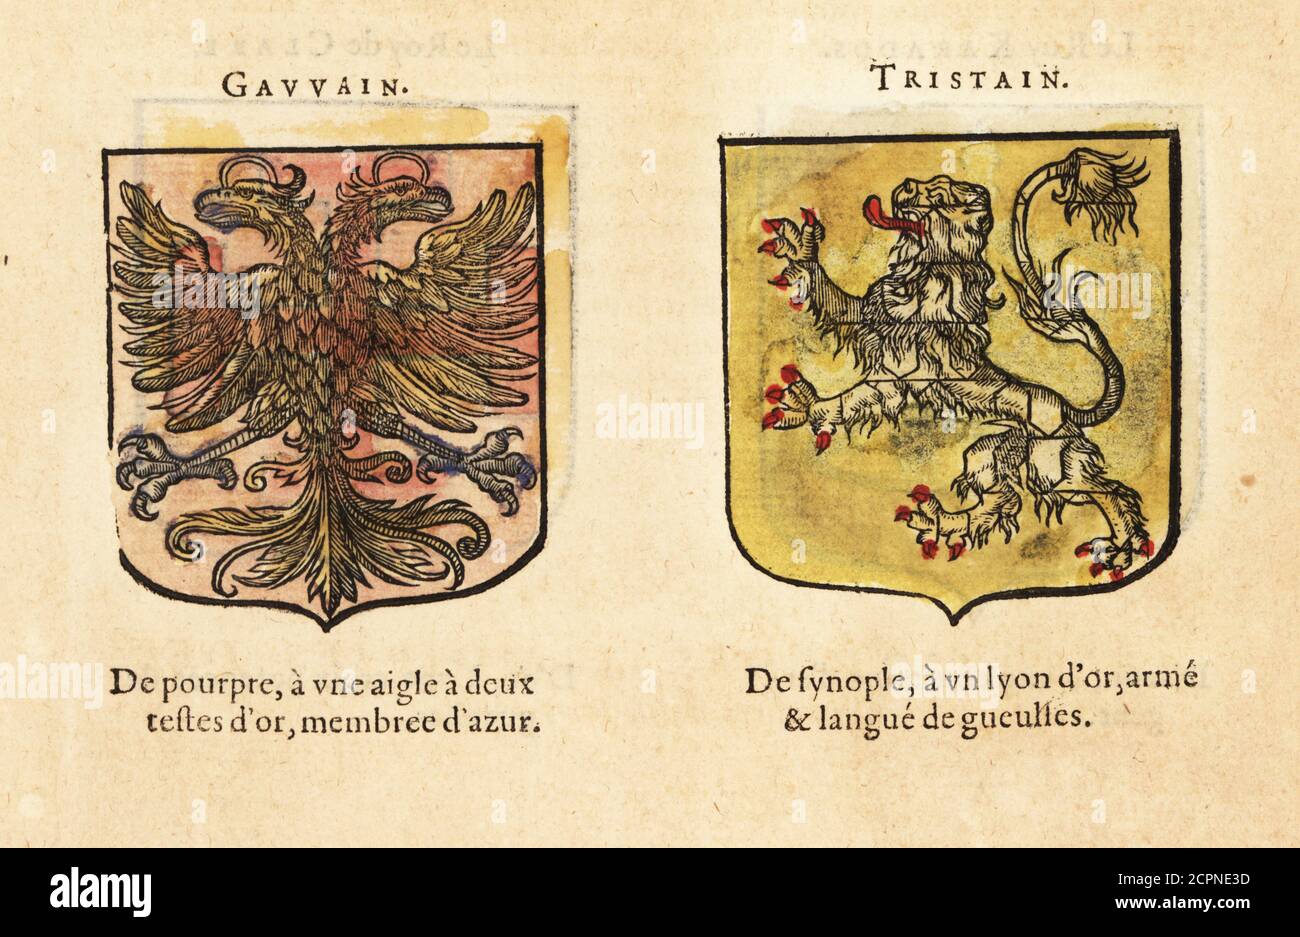 Imaginary coats of arms of King Arthur’s Knights of the Round Table: Gawain with two-headed eagle, Tristan with golden lion. Chevaliers de la table ronde: GAVVAIN, TRISTAIN. Handcoloured woodblock engraving from Hierosme de Bara’s Le Blason des Armoiries, Chez Rolet Boutonne, Paris, 1628 Stock Photo